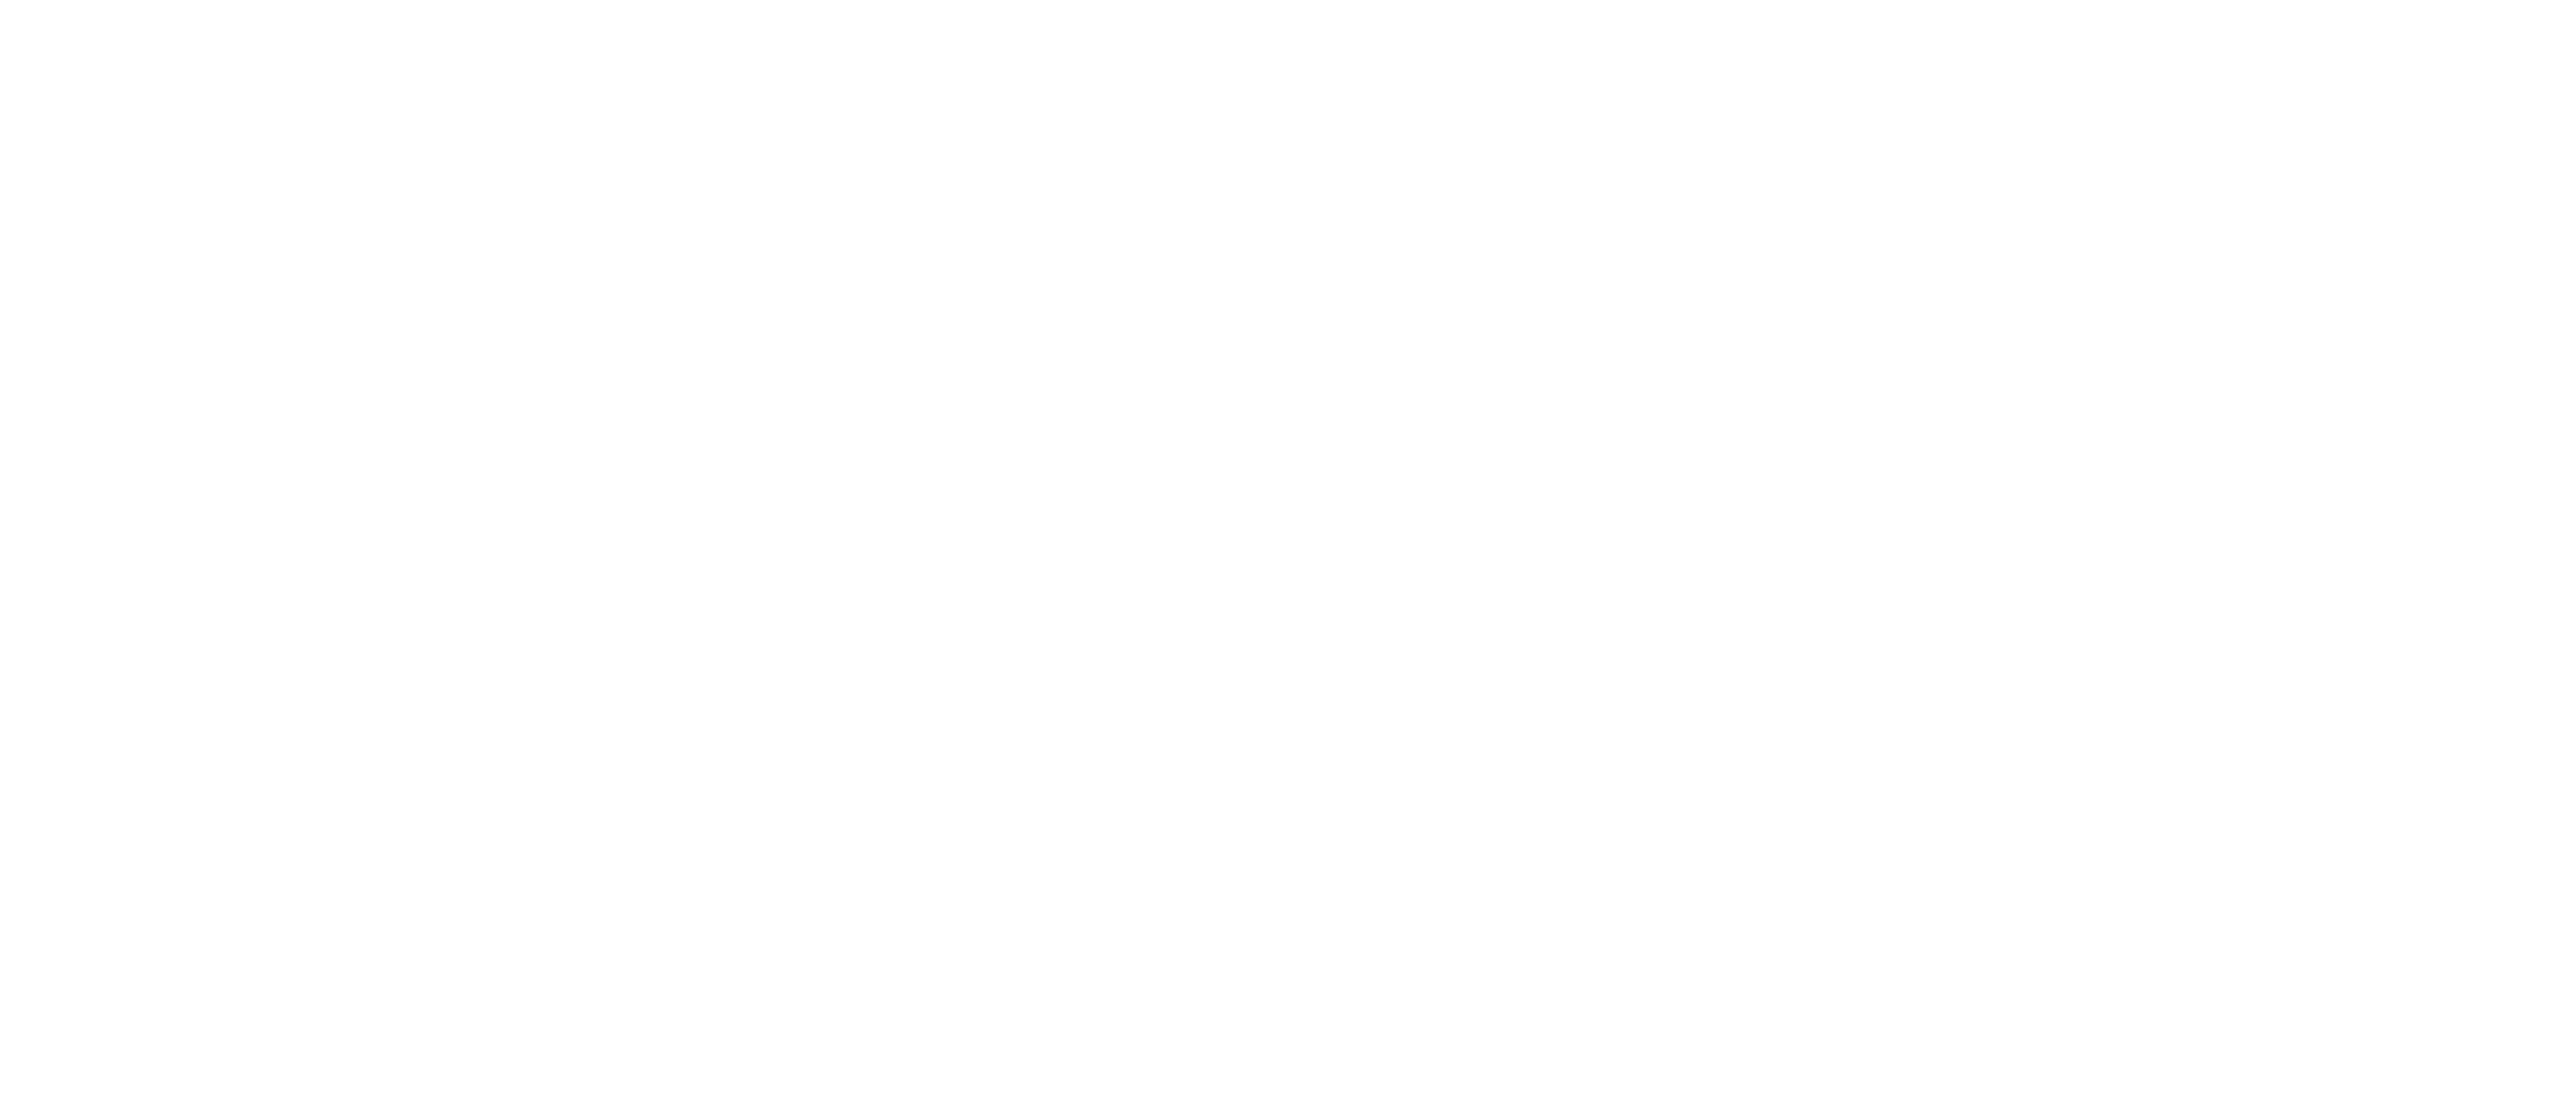 Rocky Mountain Resources